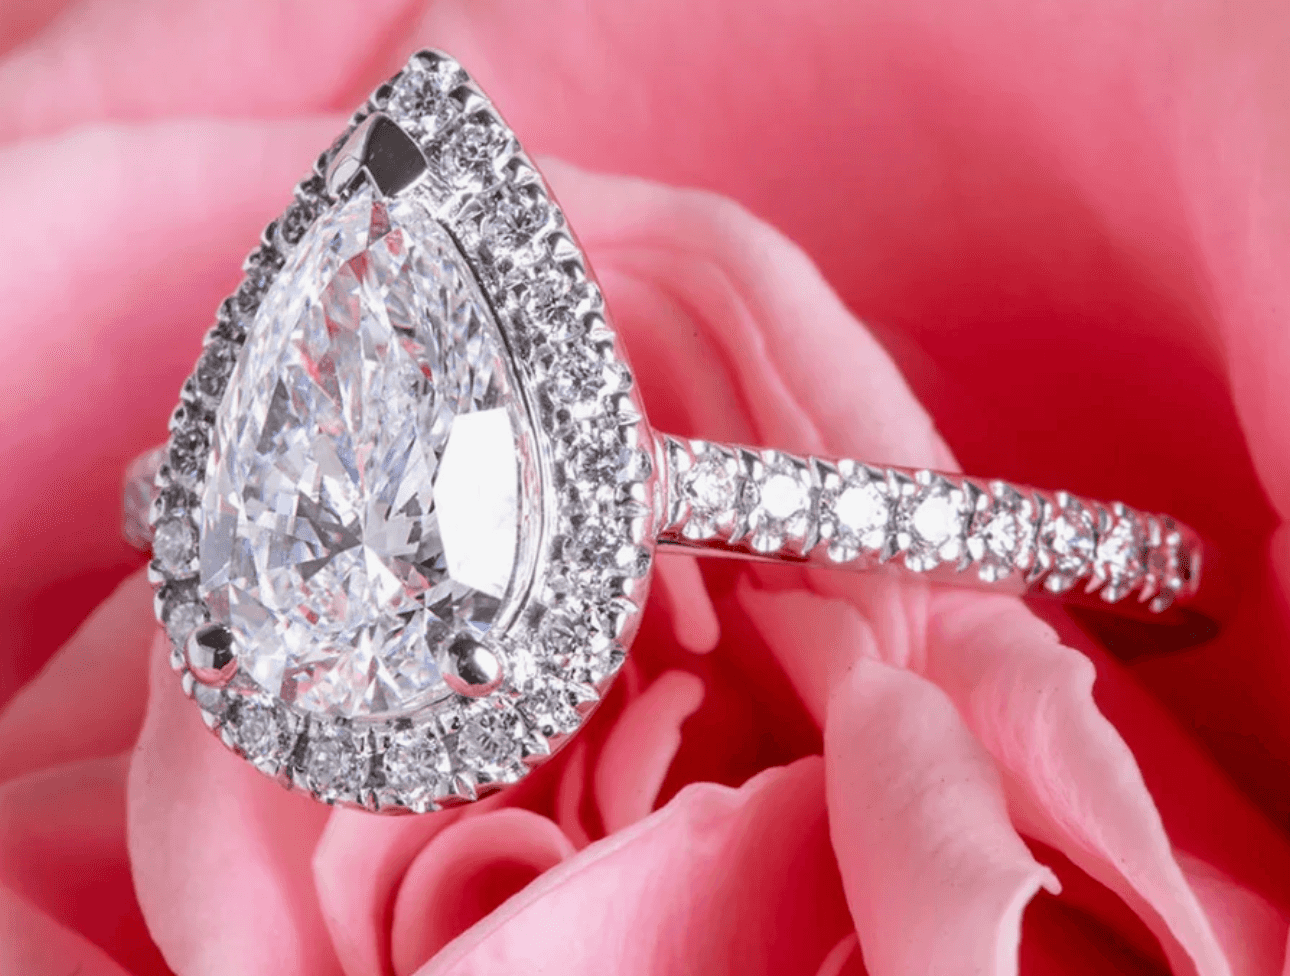 A stunning 1.58-carat pear-shaped engagement ring